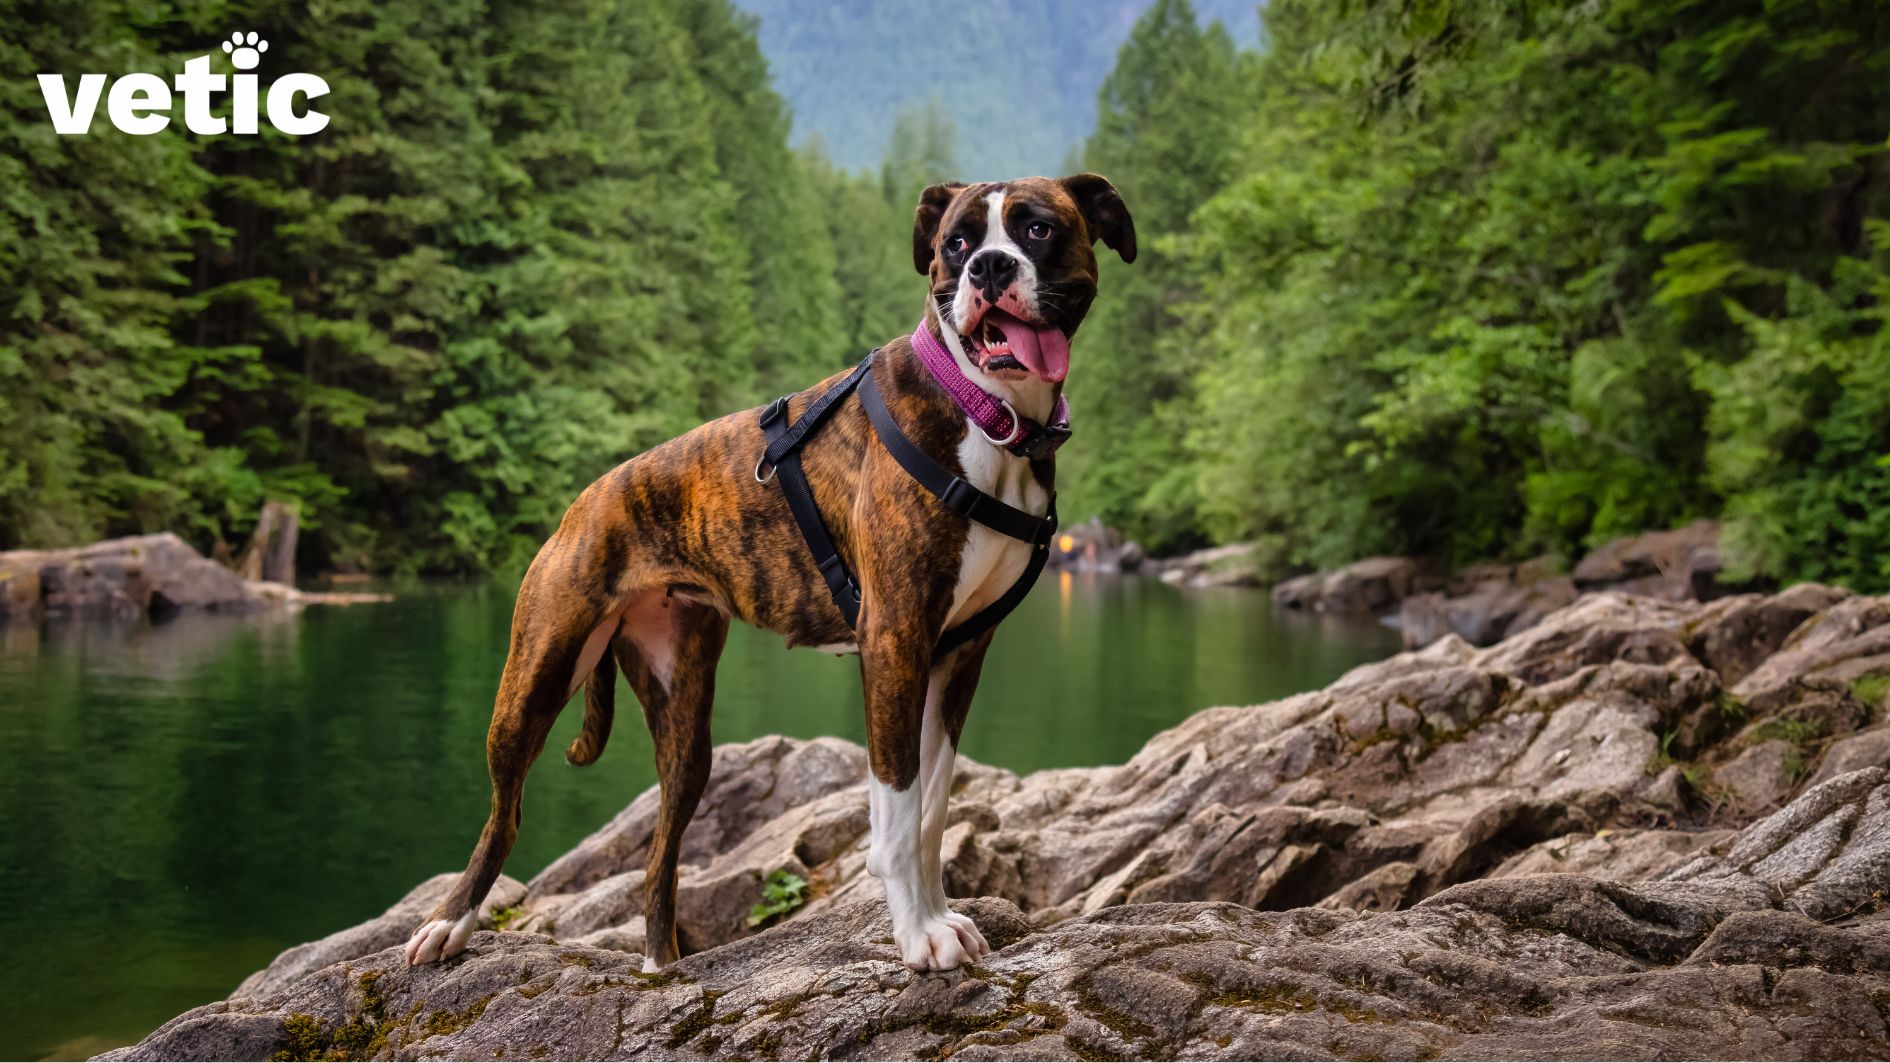 A Boxer breed dog in the outdoors. She's wearing a purple collar and black harness, standing on a rocky incline. the greenery and a part of a lake is visible in the background.